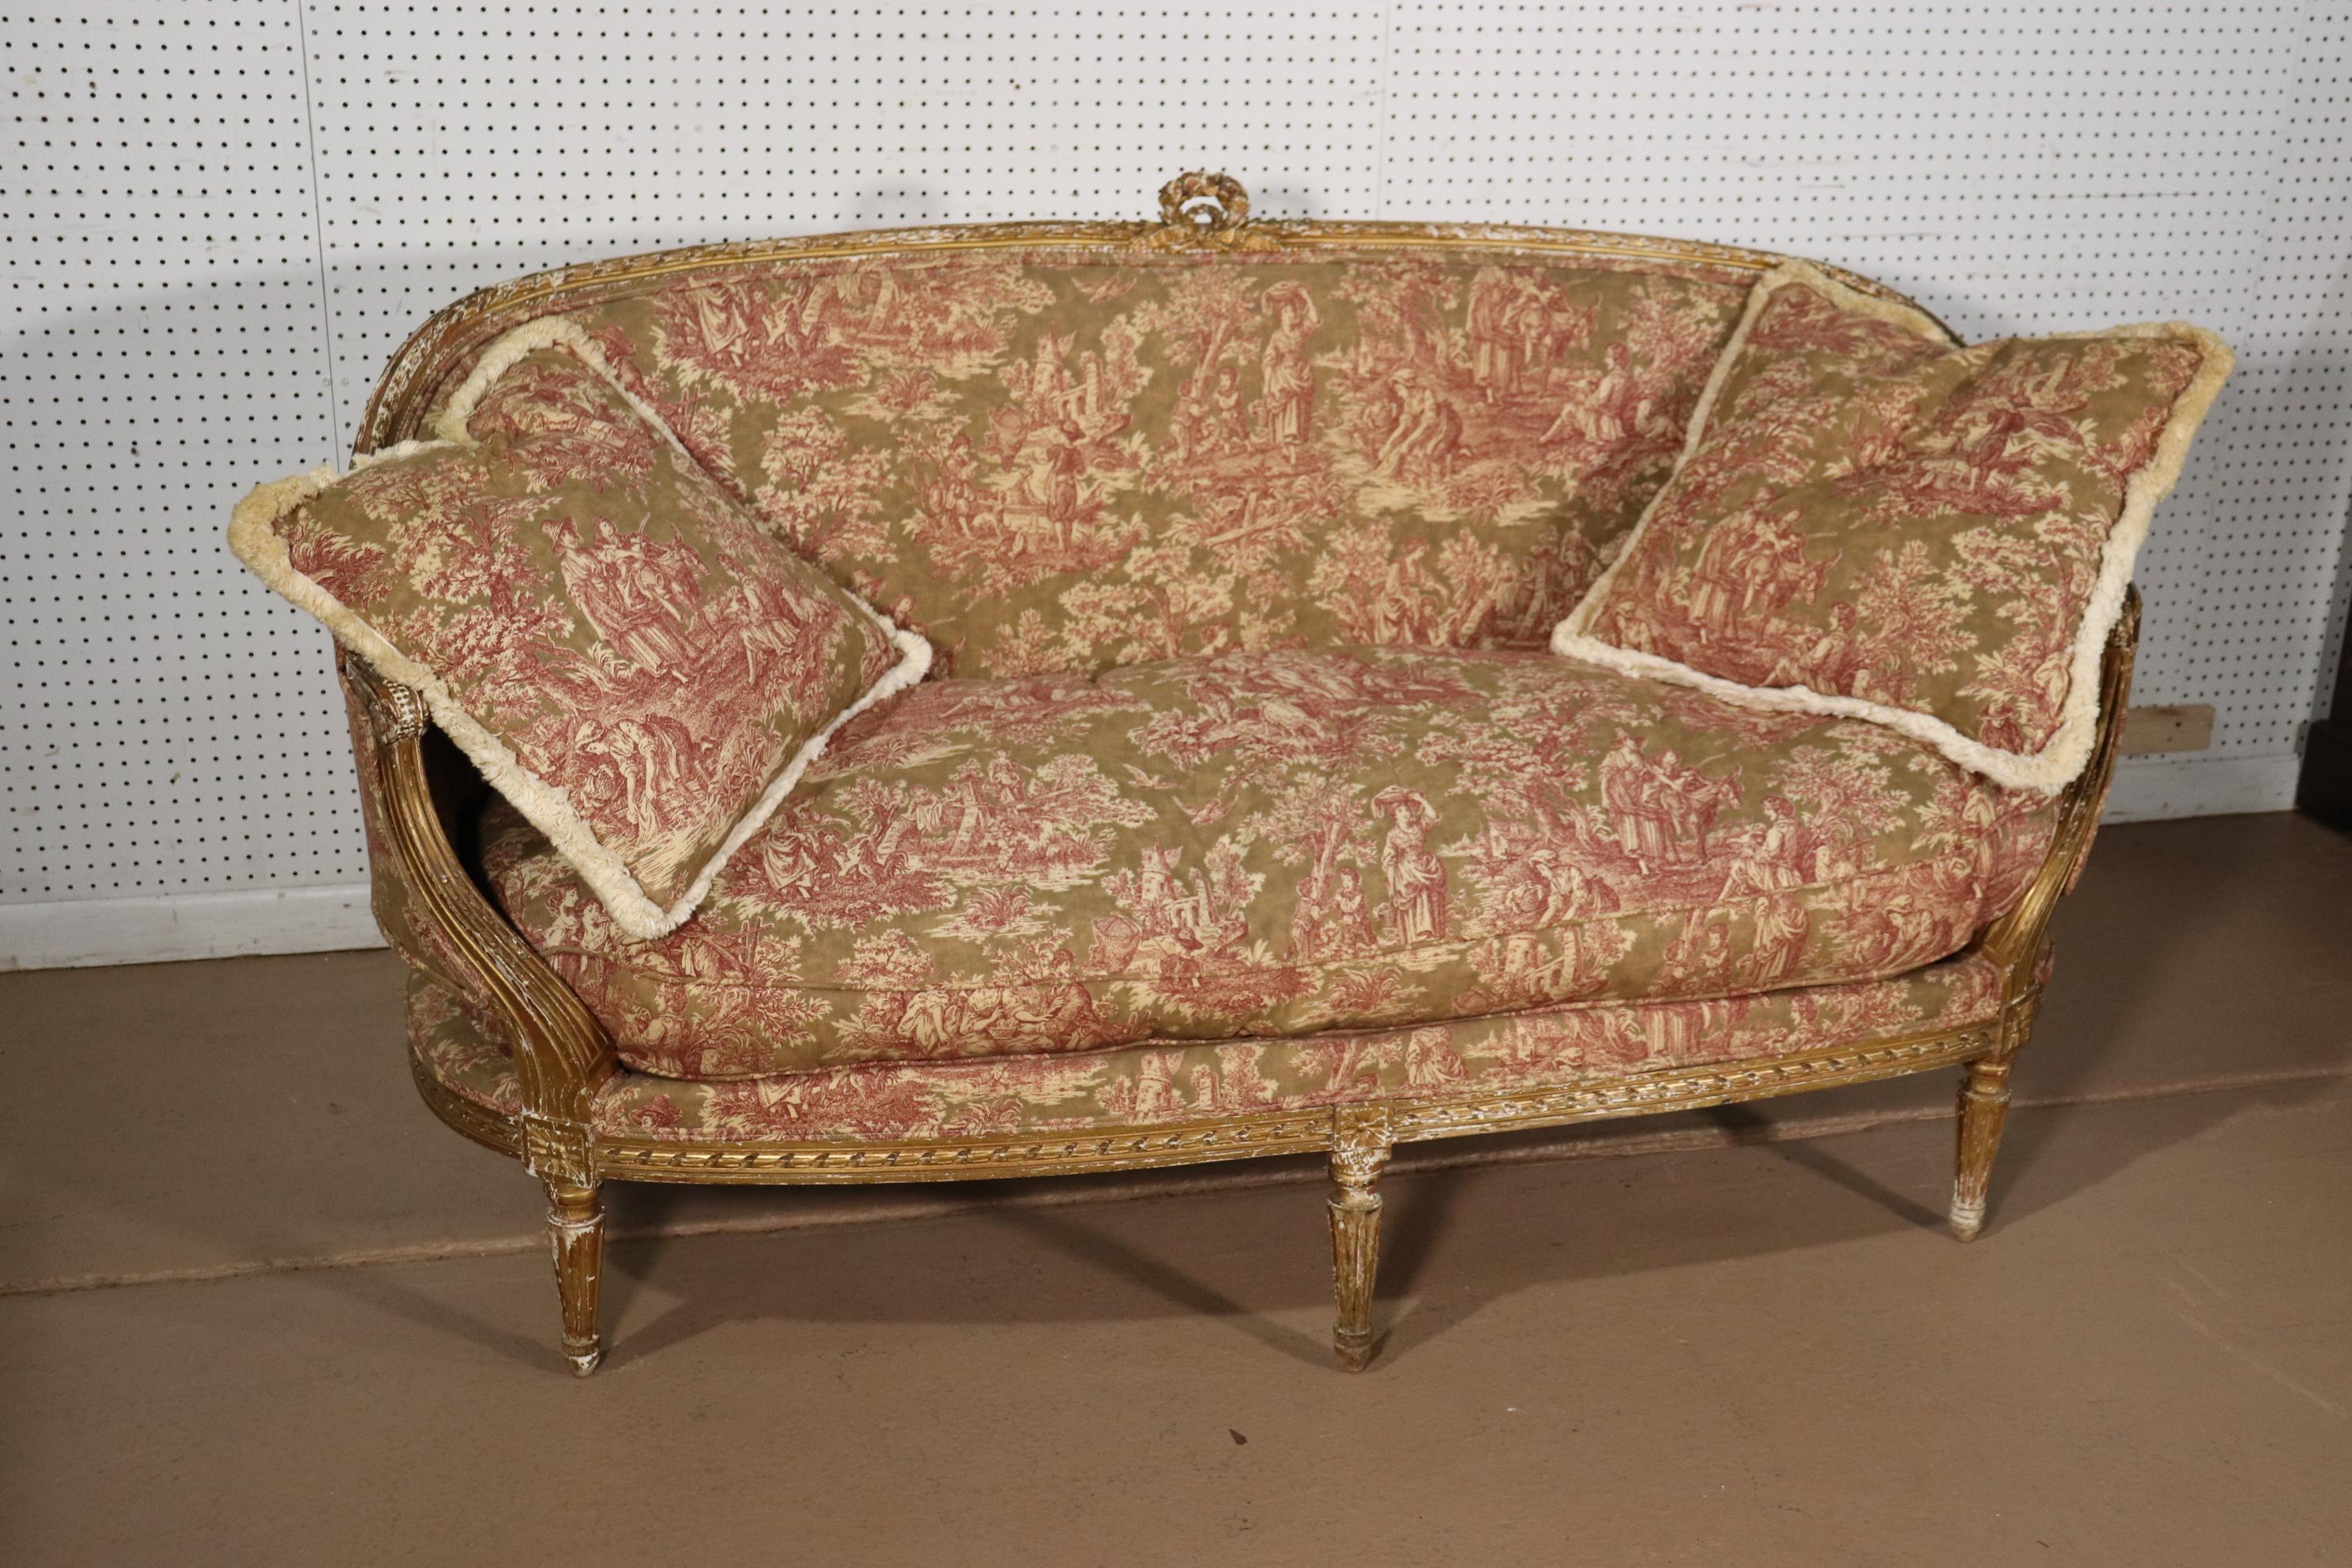 19th Century French Louis XVI Gilded Settee Canape, Circa 1890